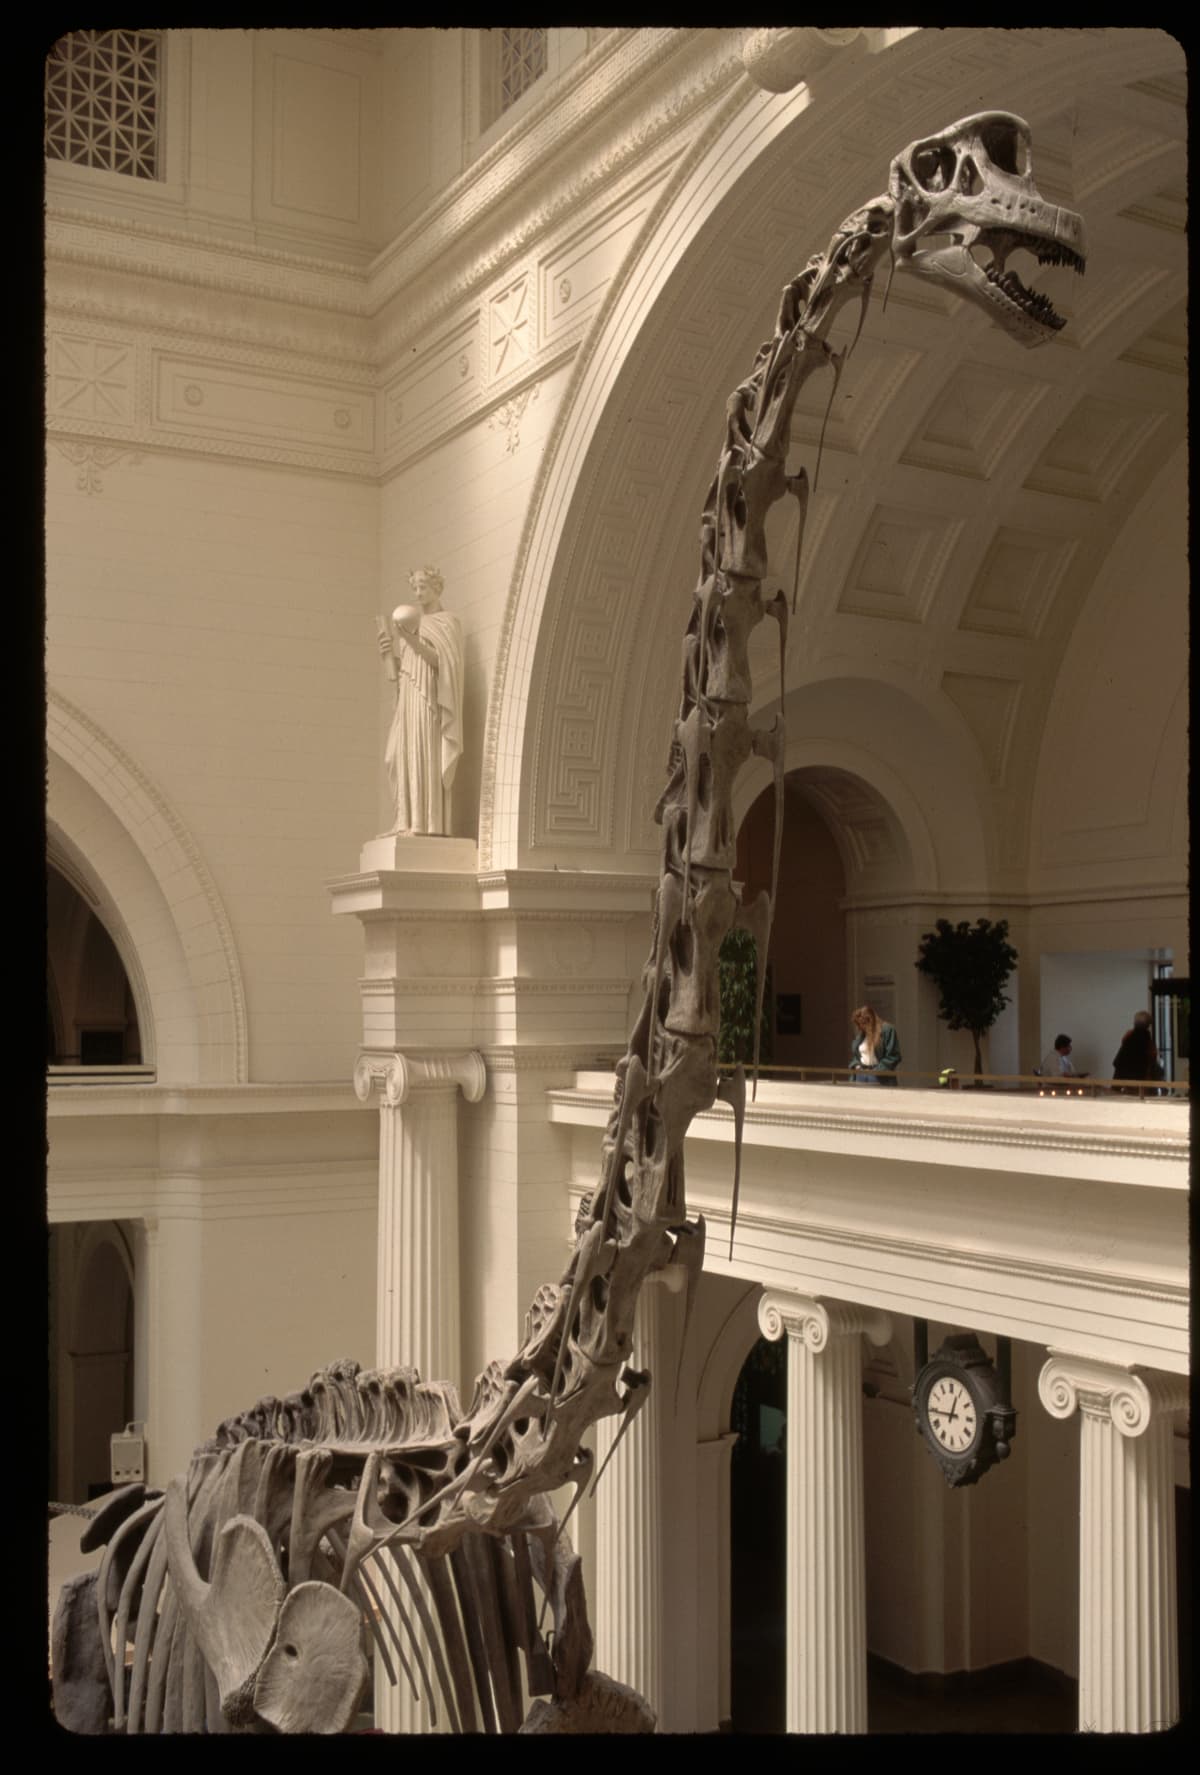 Sauropod dinosaur bones on display at the Field Museum in downtown Chicago Illinois